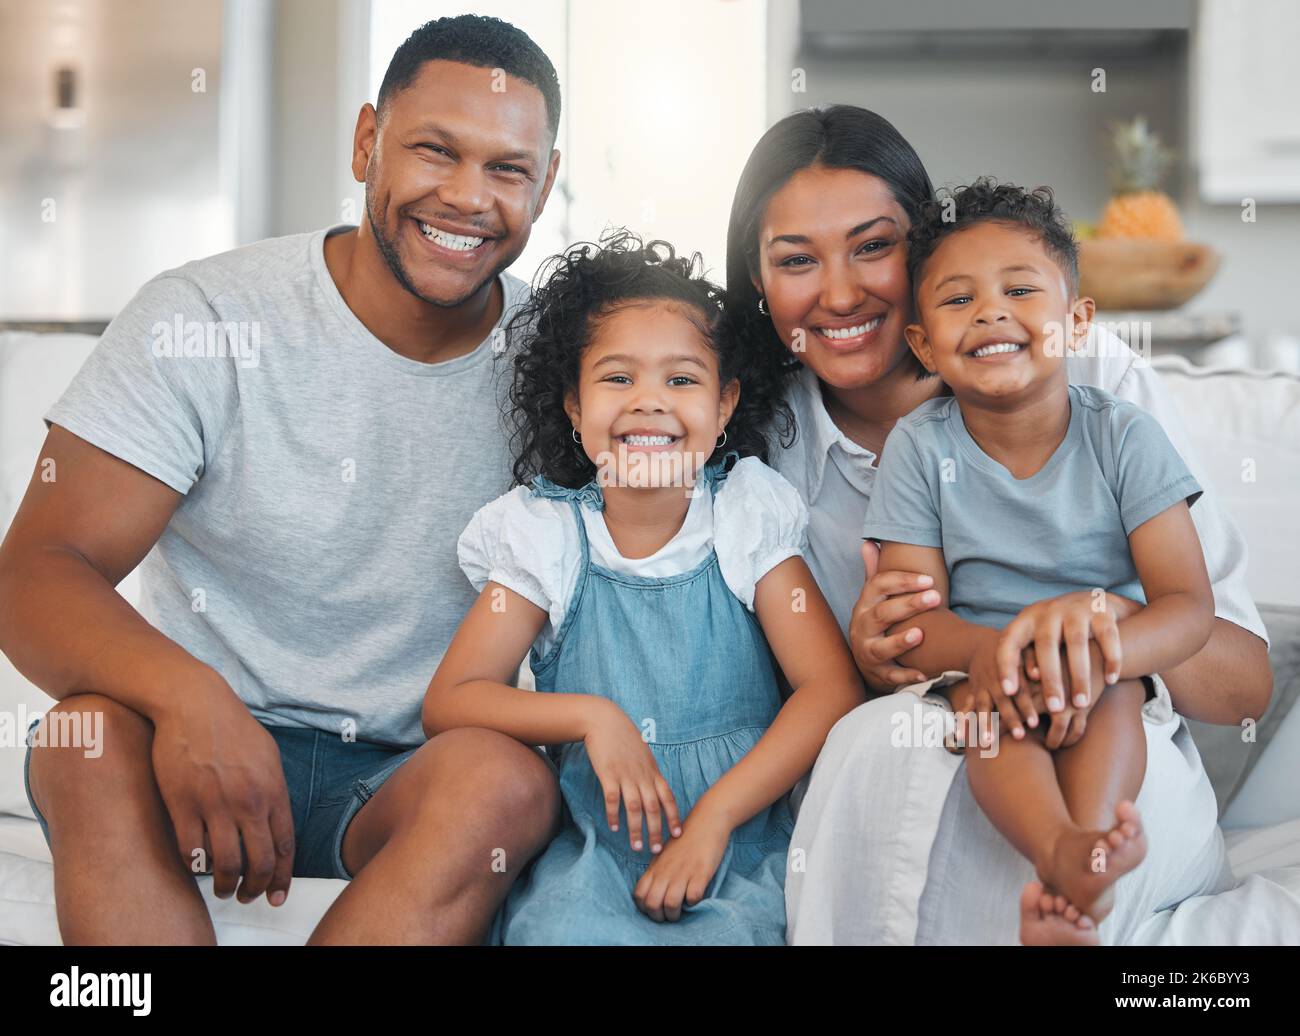 Weve arrived. a young family happily bonding together on the sofa at home. Stock Photo